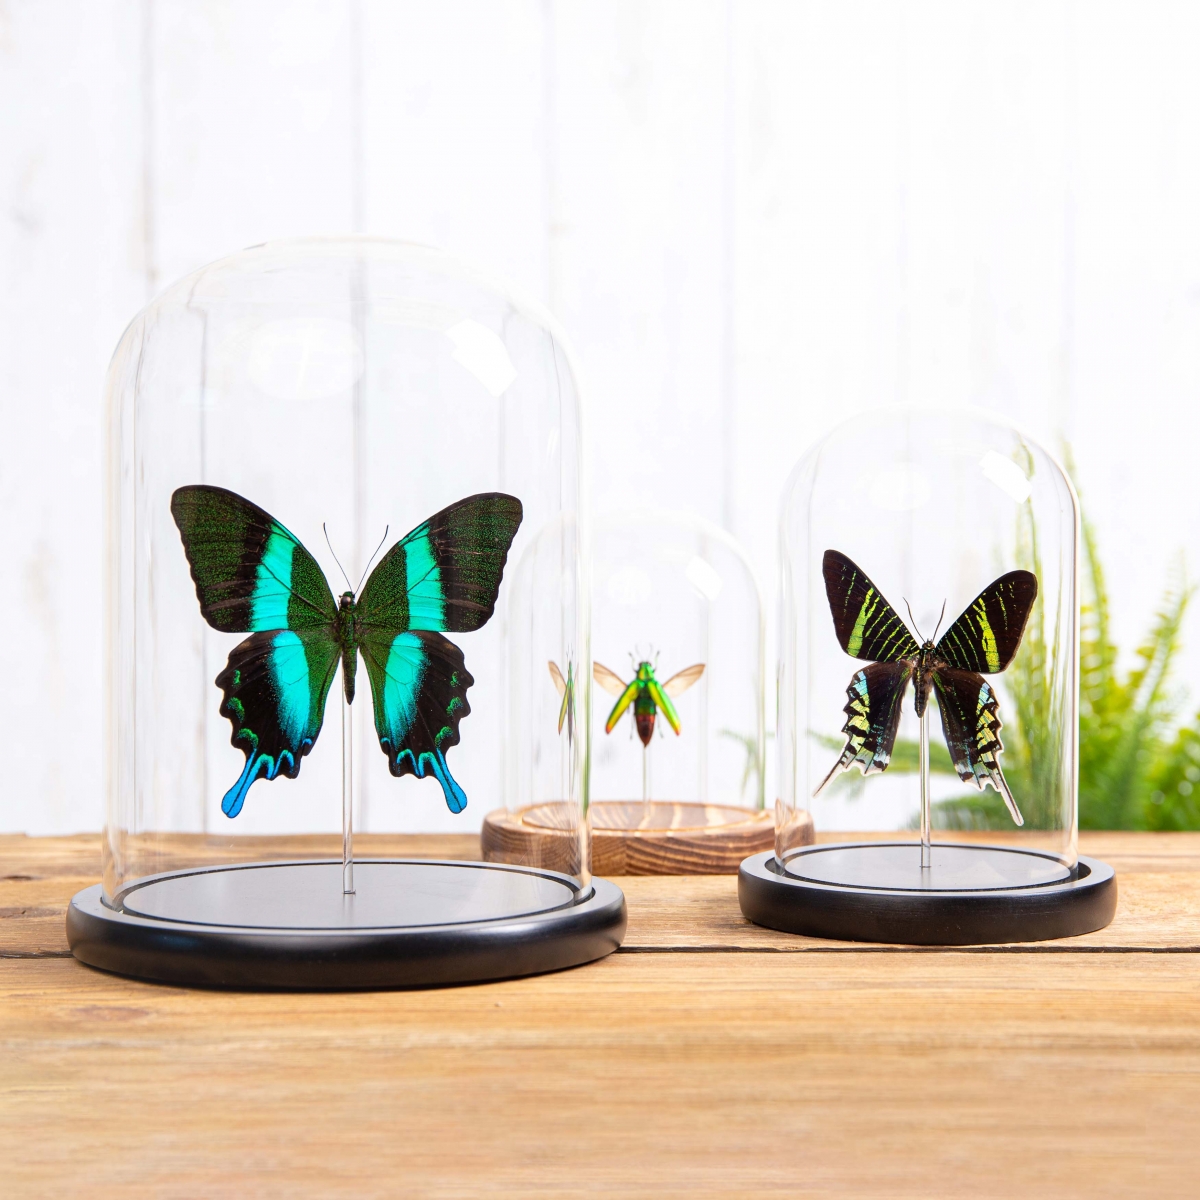 Blue-Spotted Charaxes in Glass Dome with Wooden Base (Charaxes ameliae)